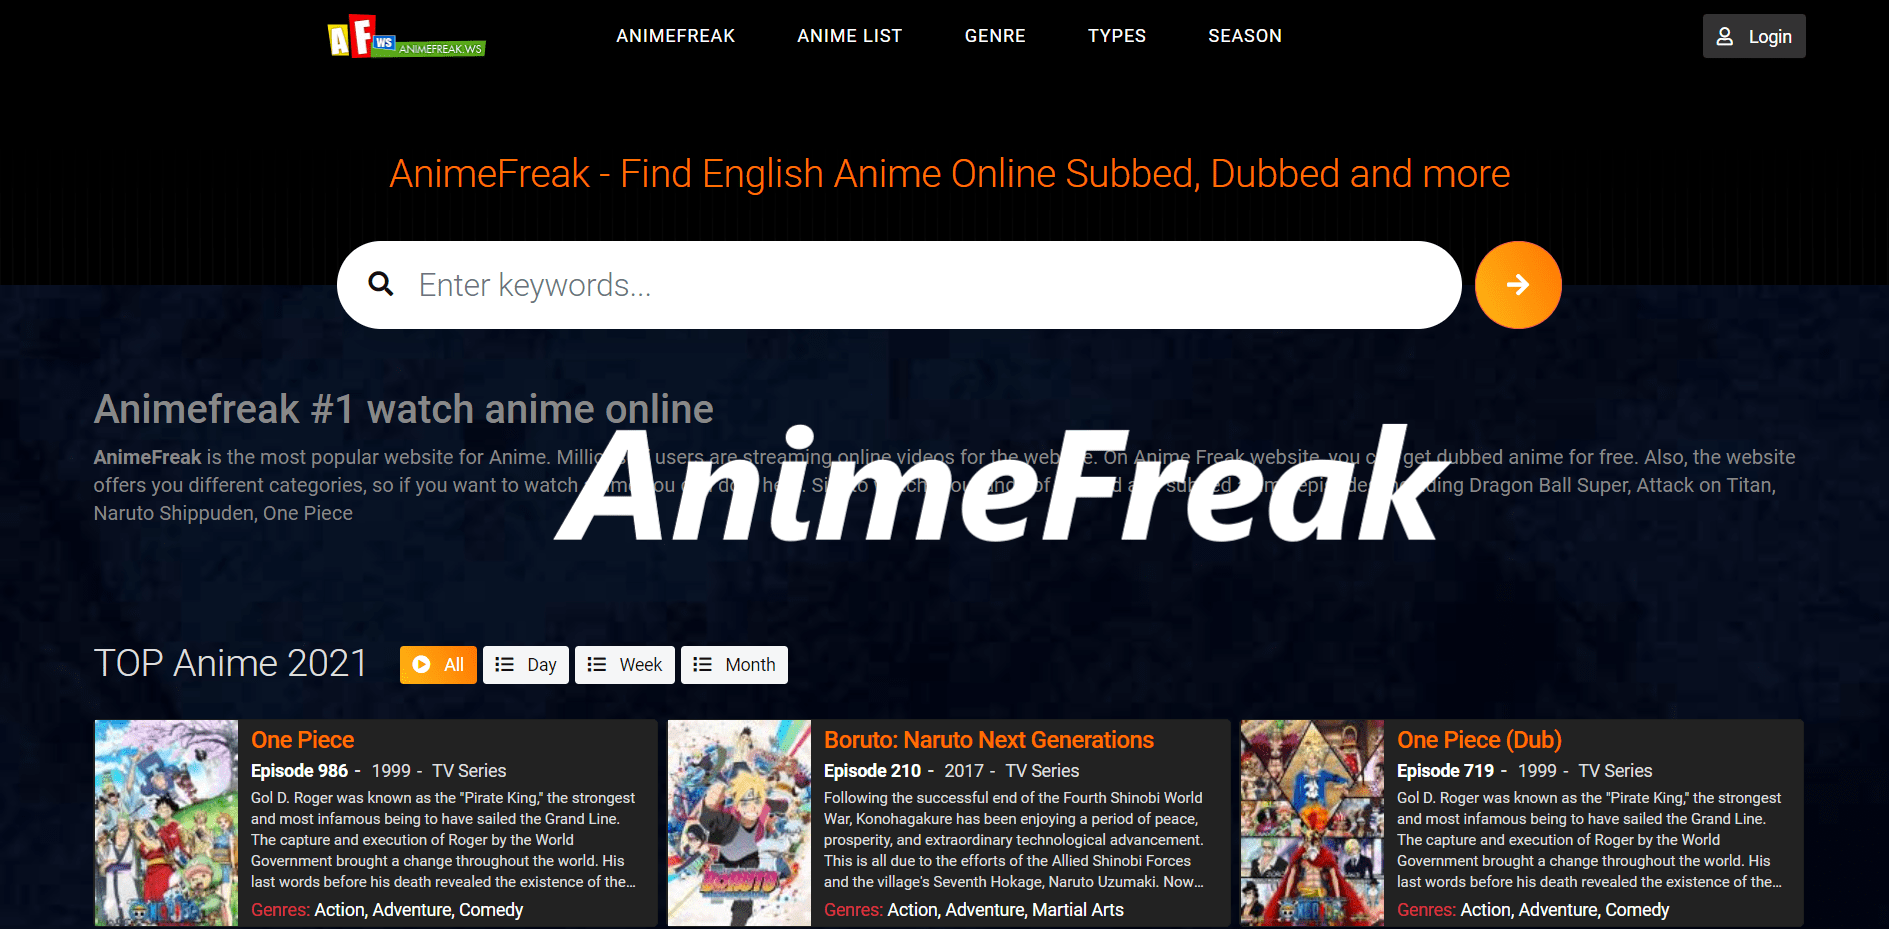 Animefreak search bar with anime series cover page and description